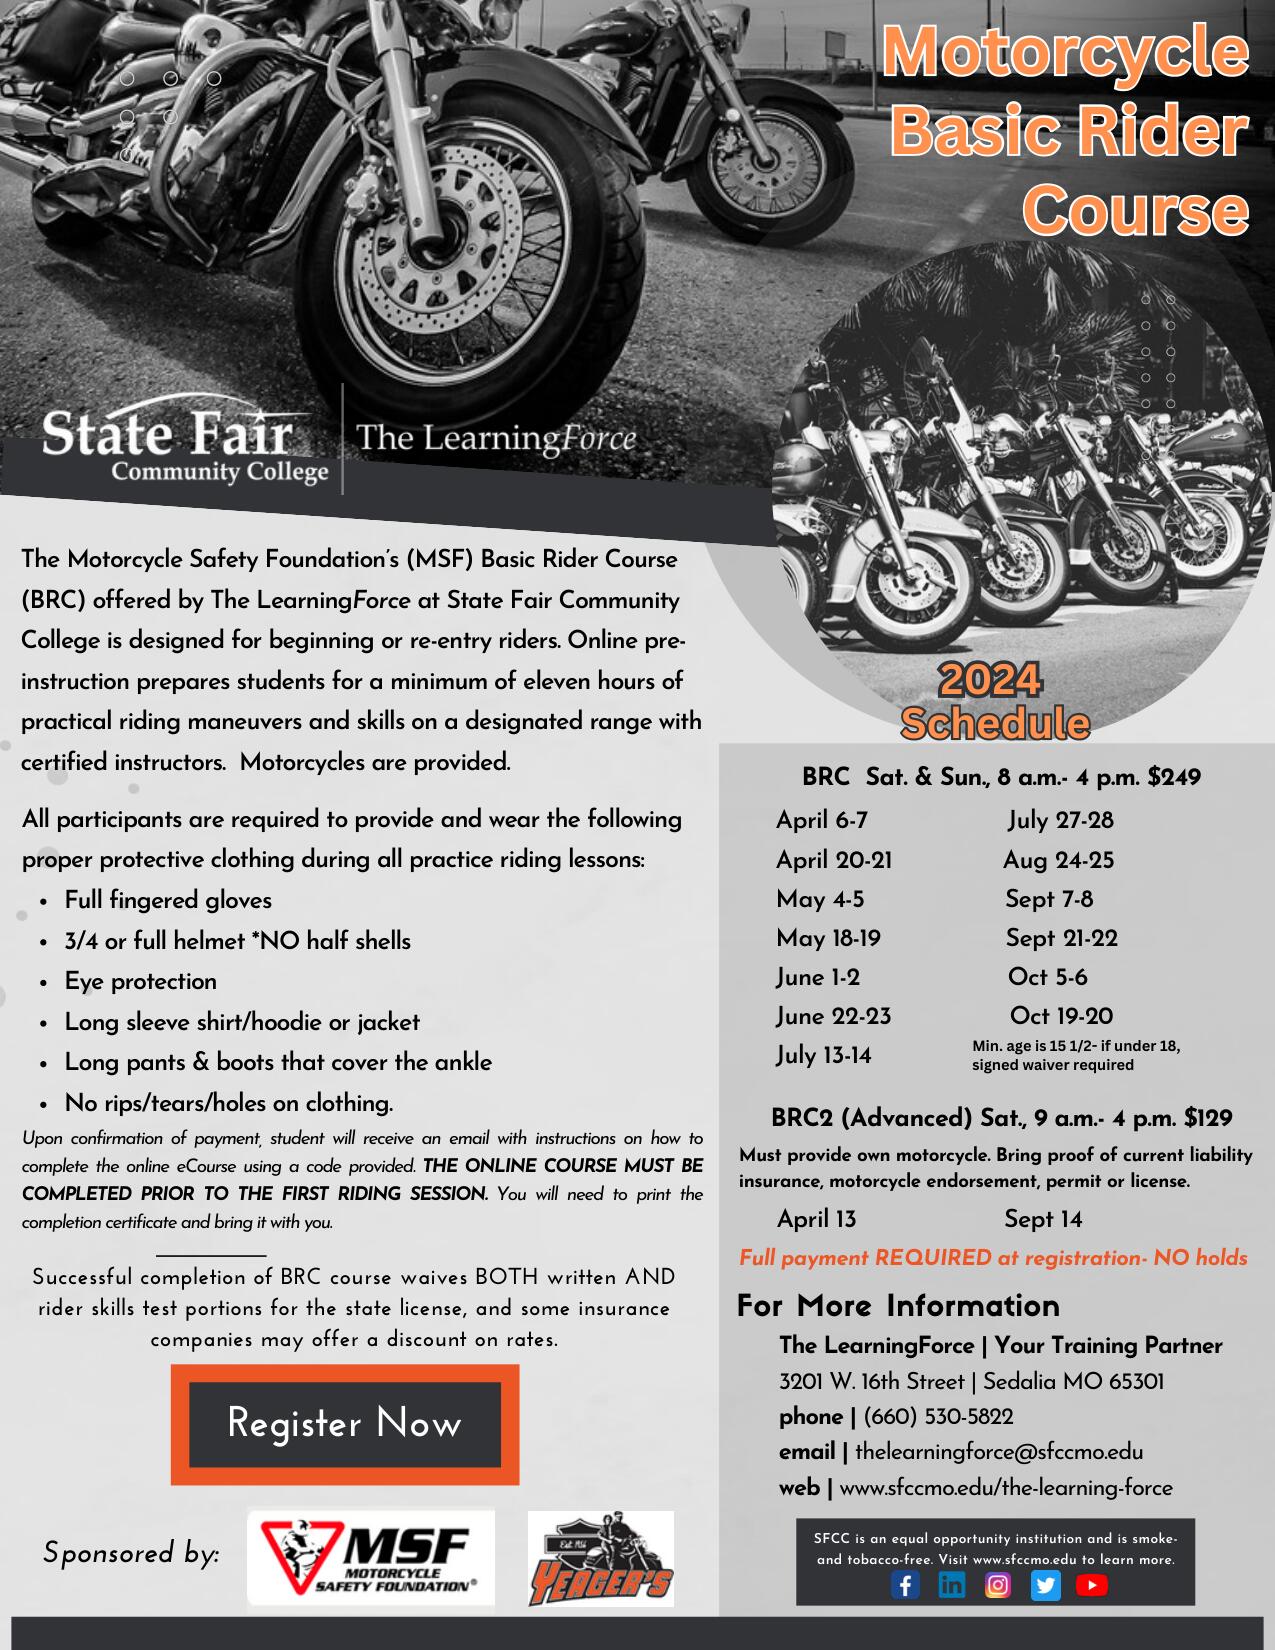 Read more about SFCC to offer Motorcycle Basic Rider Course